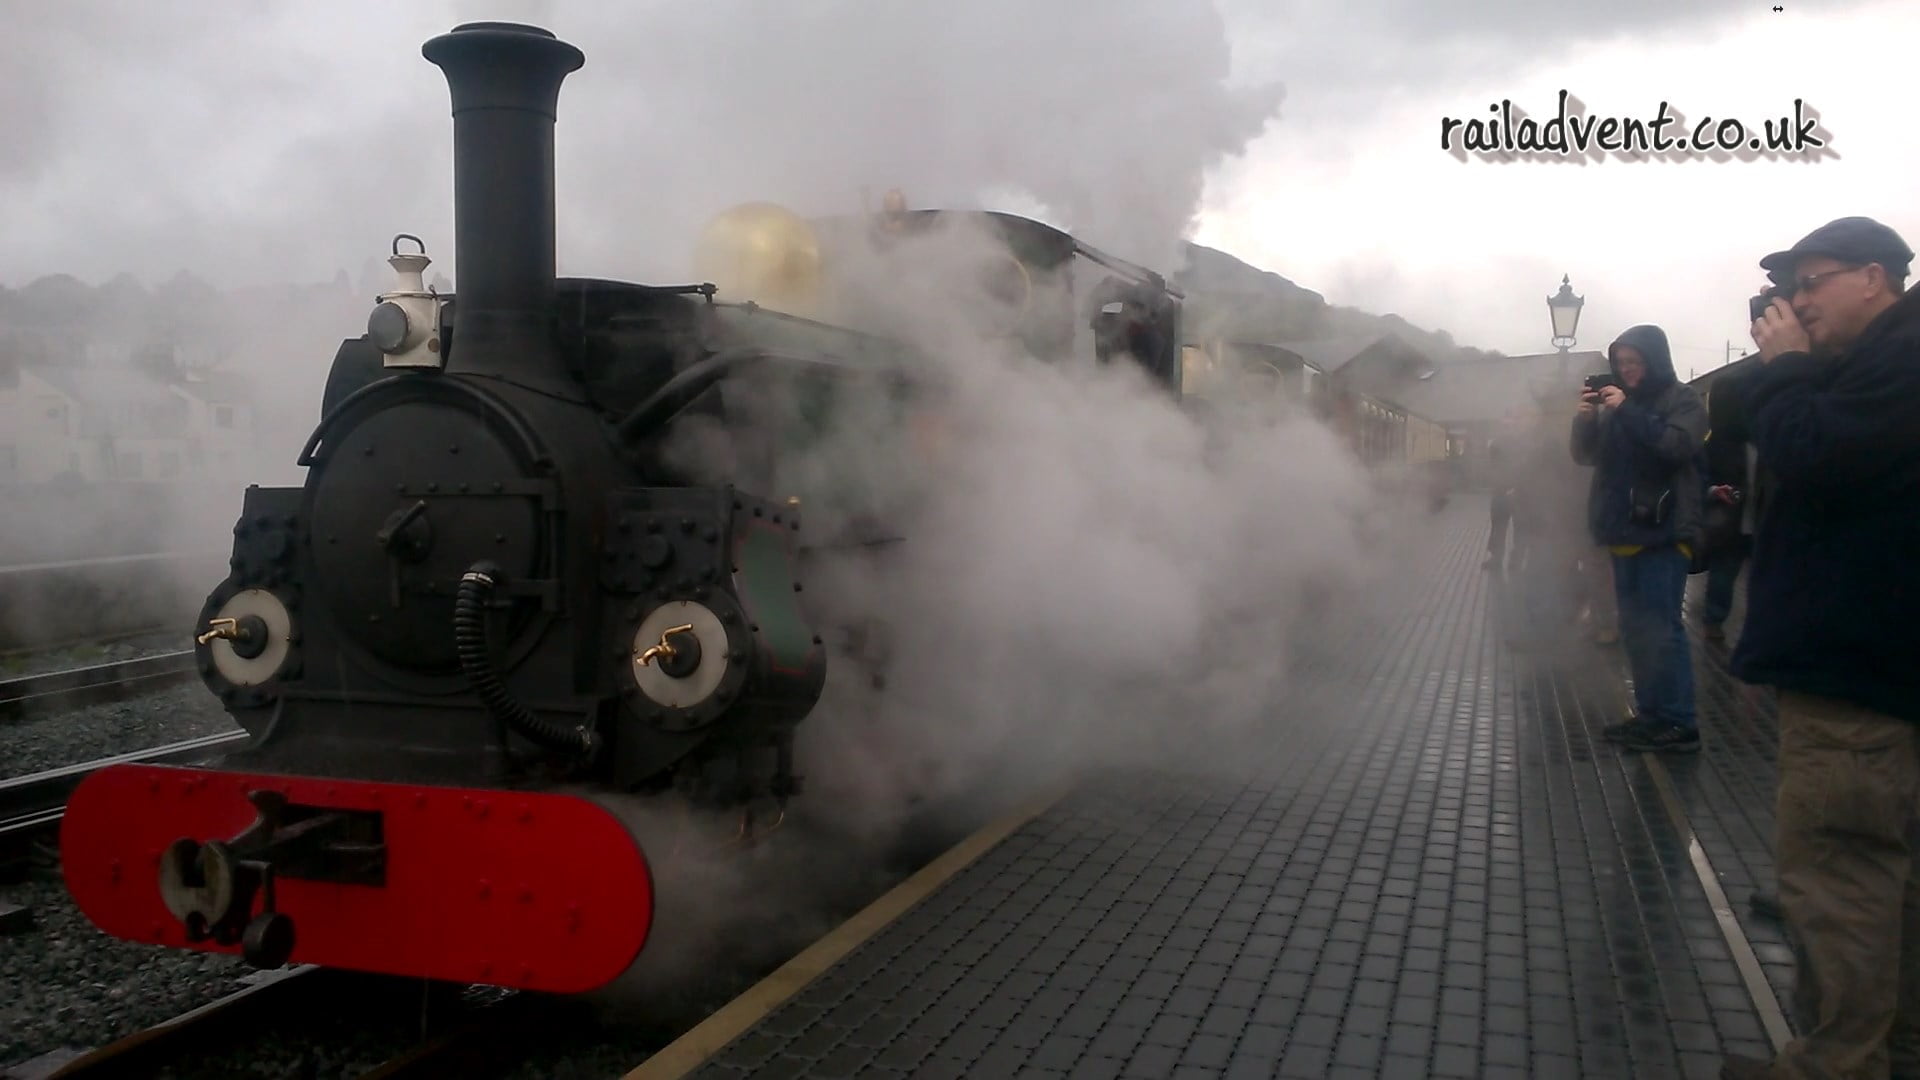 Linda and Blanche emerge through the steam departing Porthmadog